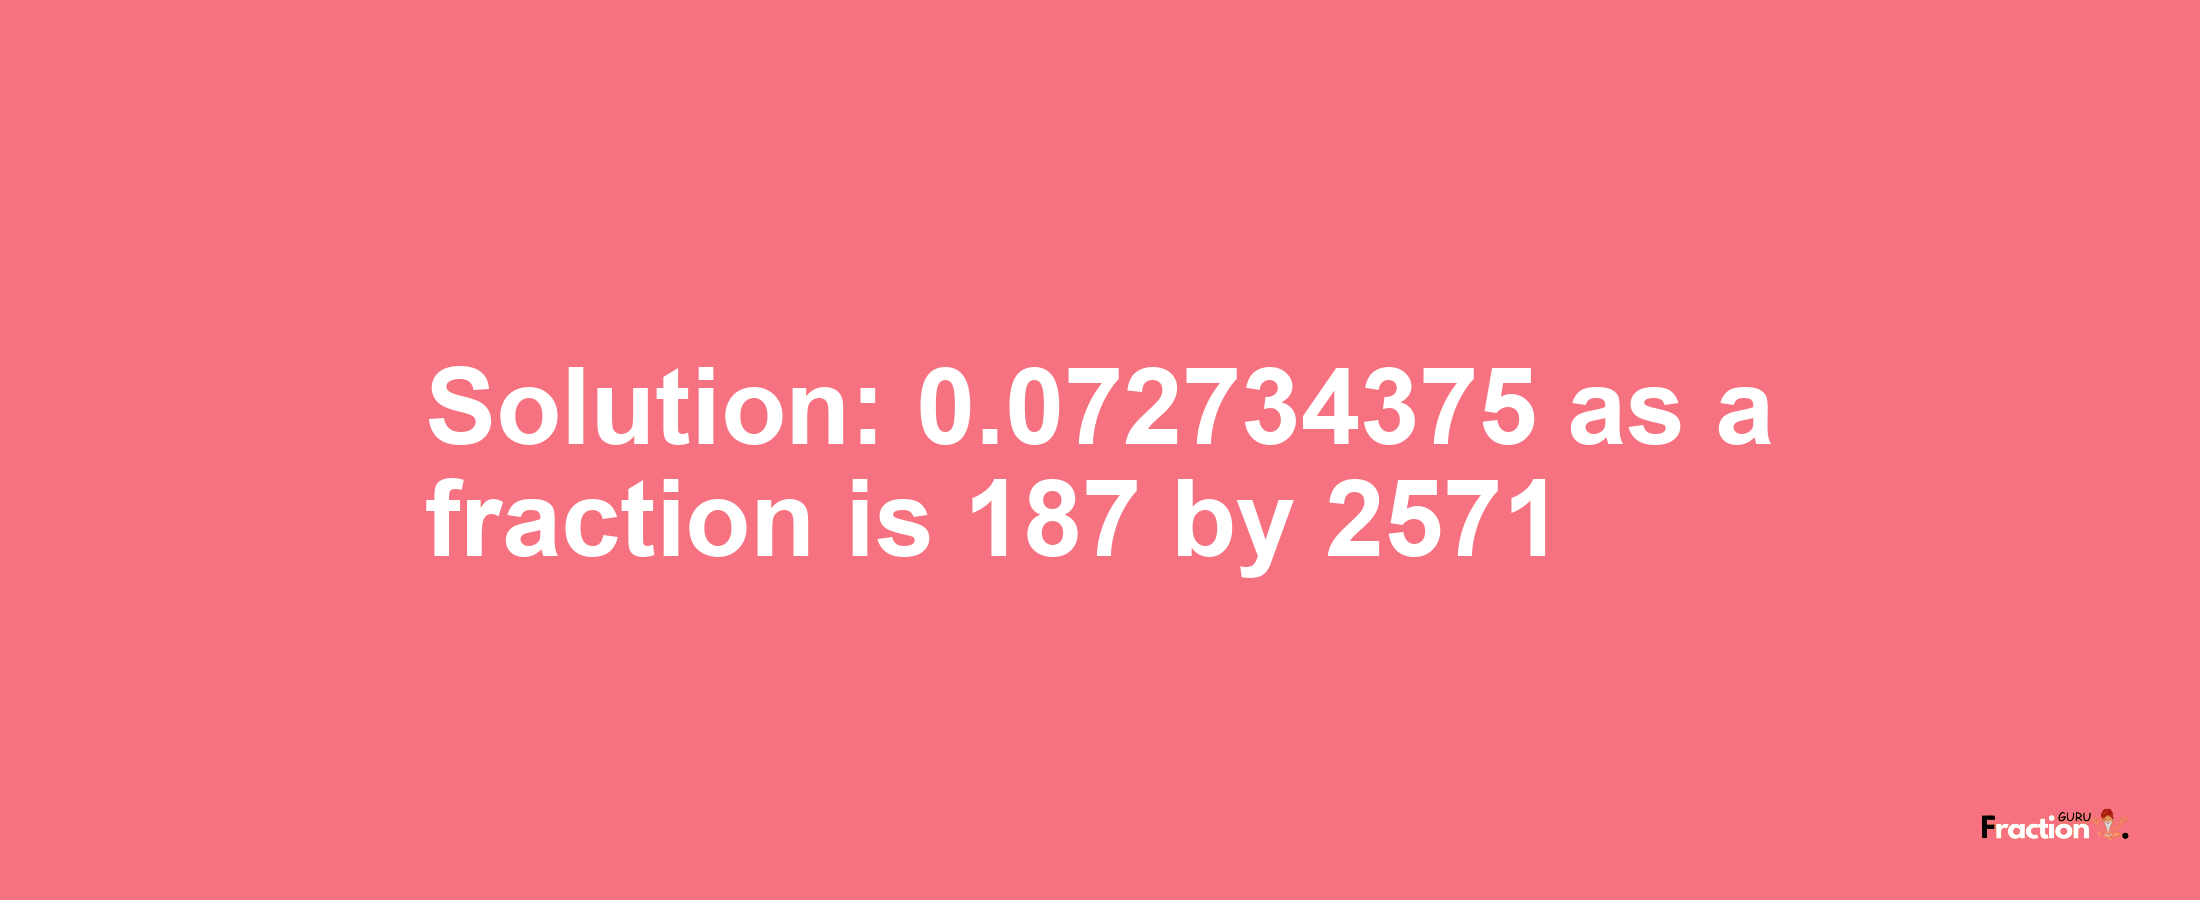 Solution:0.072734375 as a fraction is 187/2571